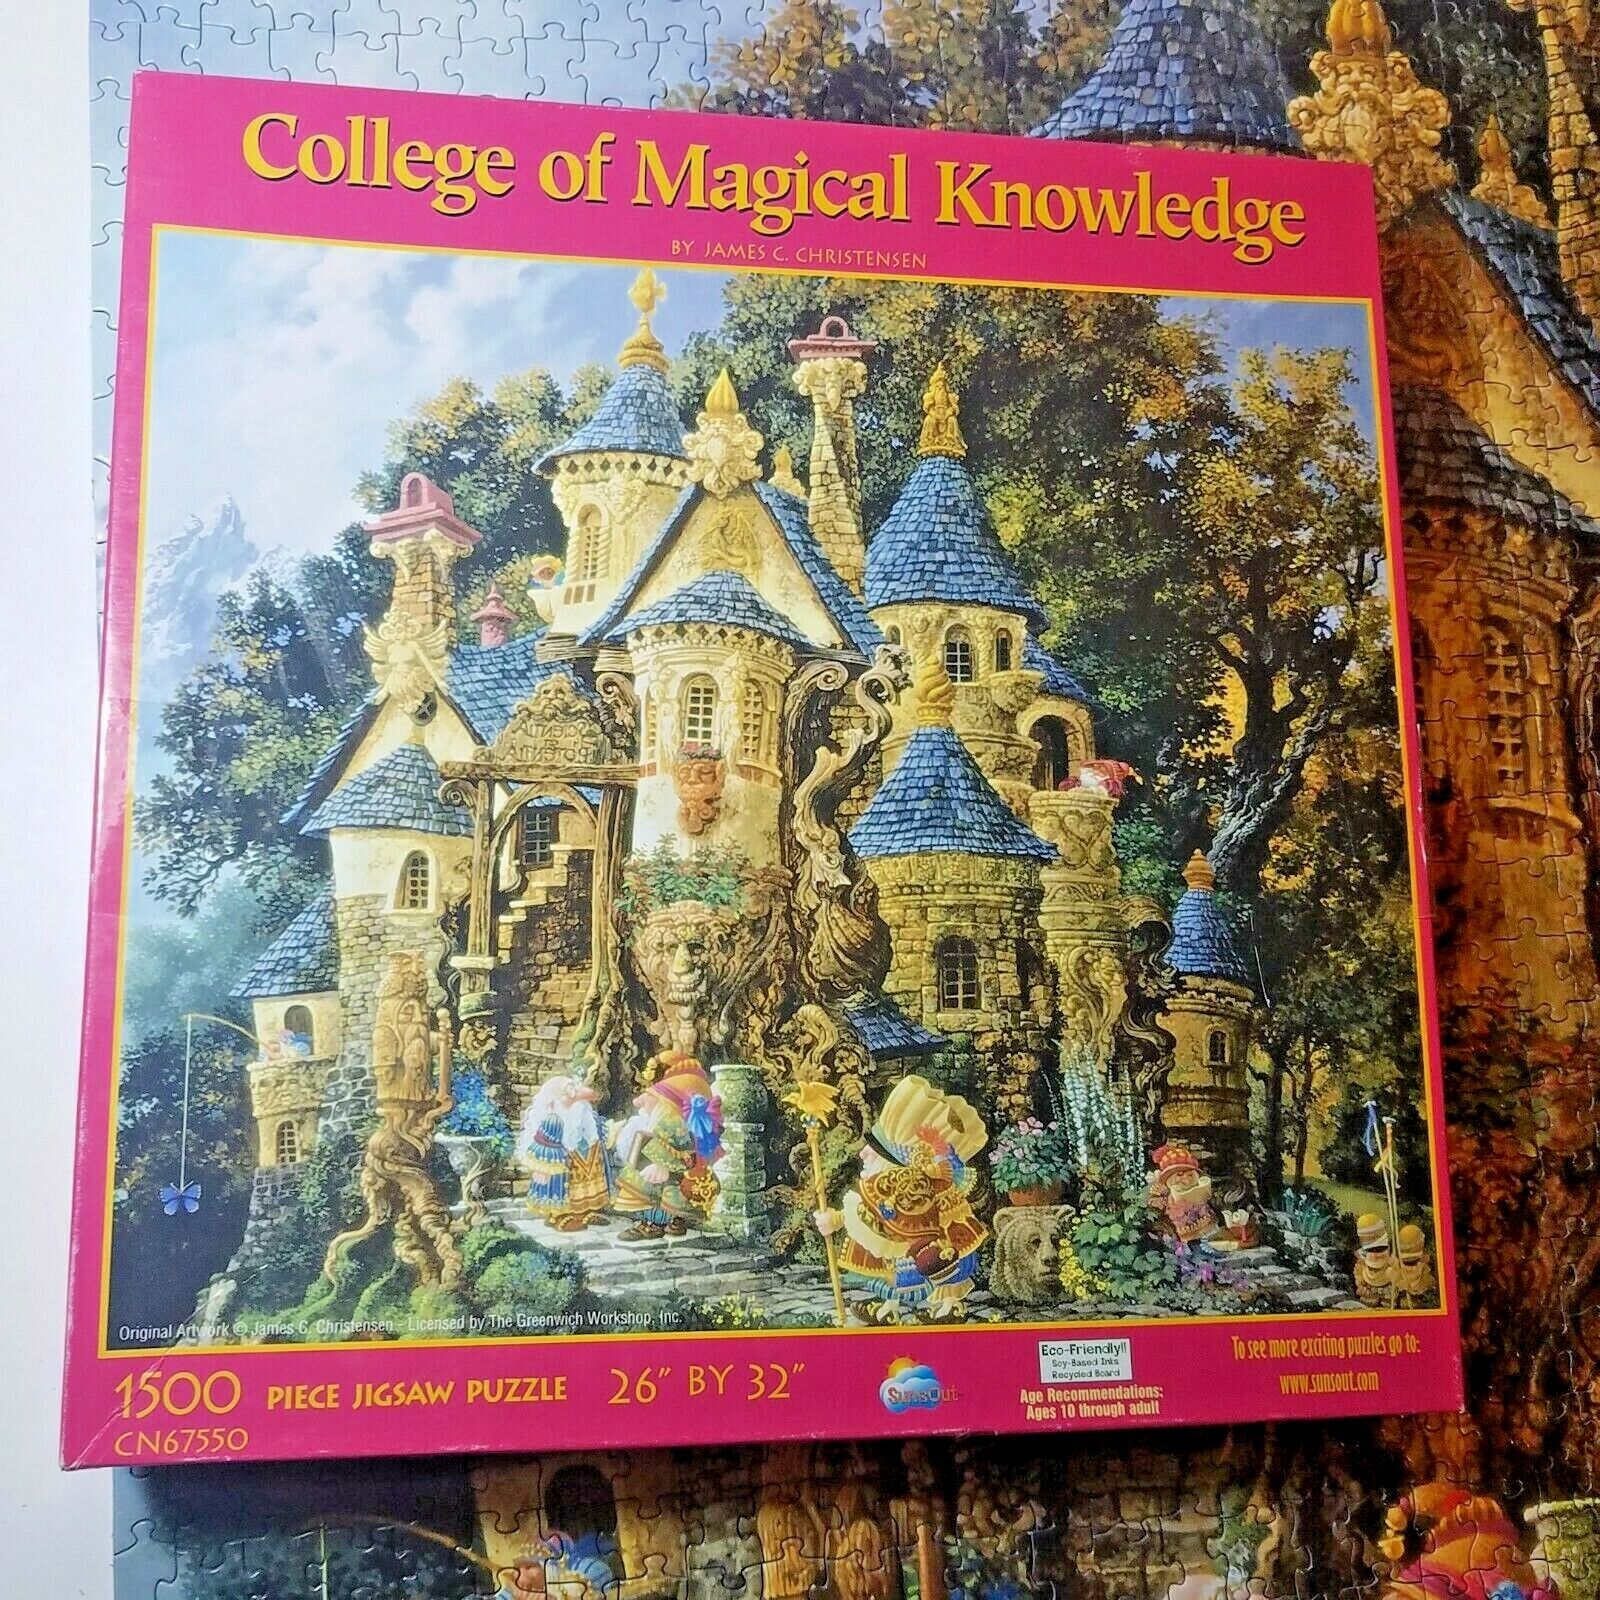 SunsOut, College of Magical Knowledge, 1500 Pc, James Christensen, 26x32" Puzzle